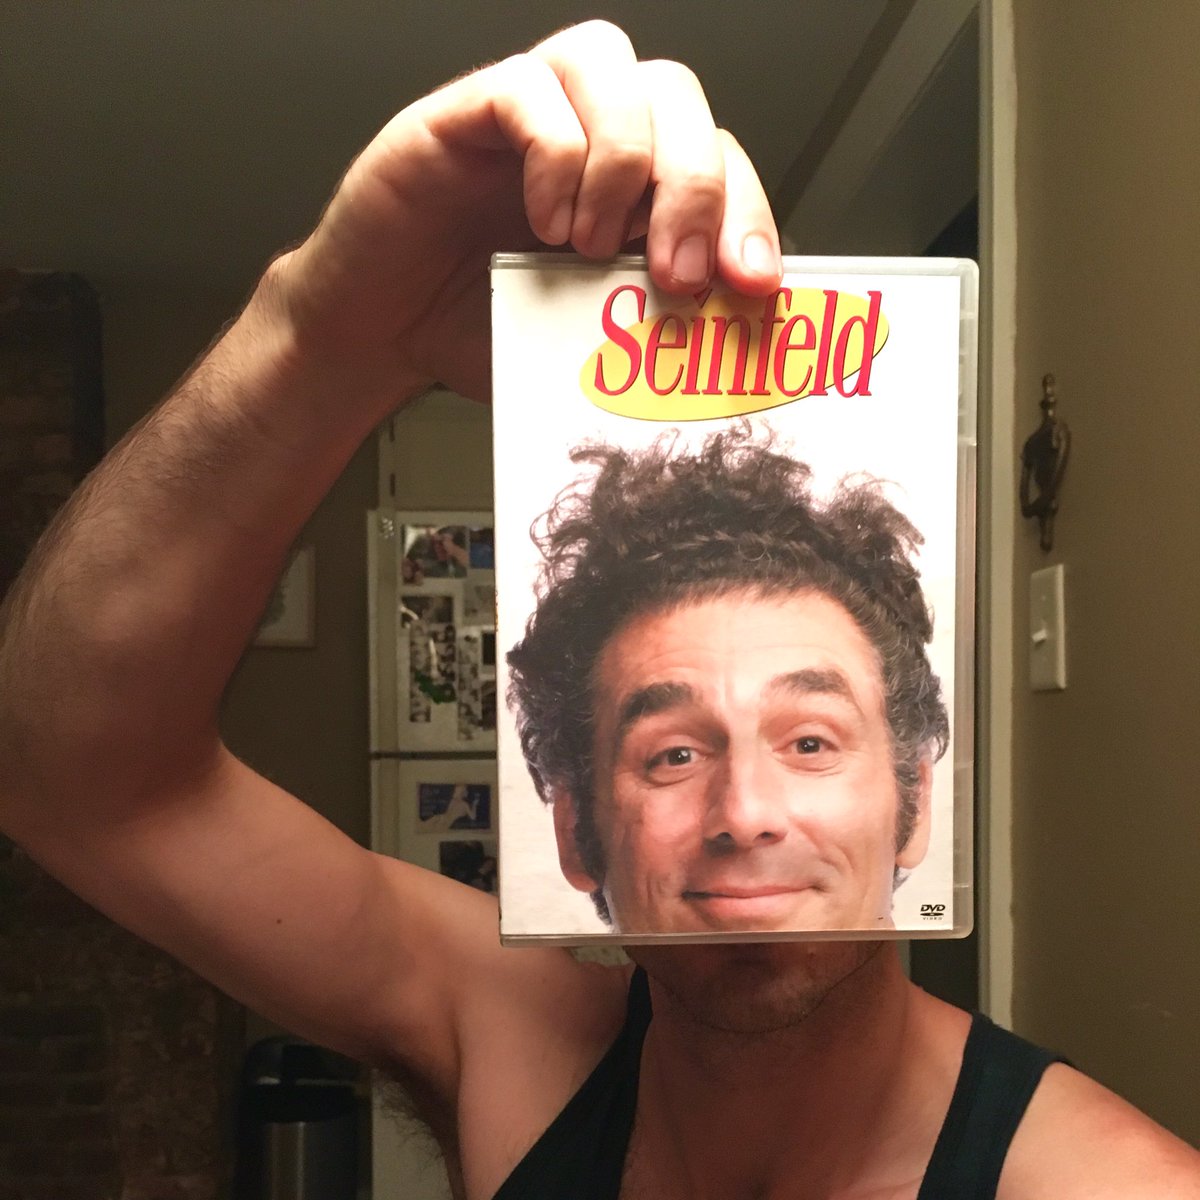 Ben O'Brien poses with the Seinfeld DVD sleeve as though he is Kramer (Ben O'Brien/Kelly Lasserre/Twitter)